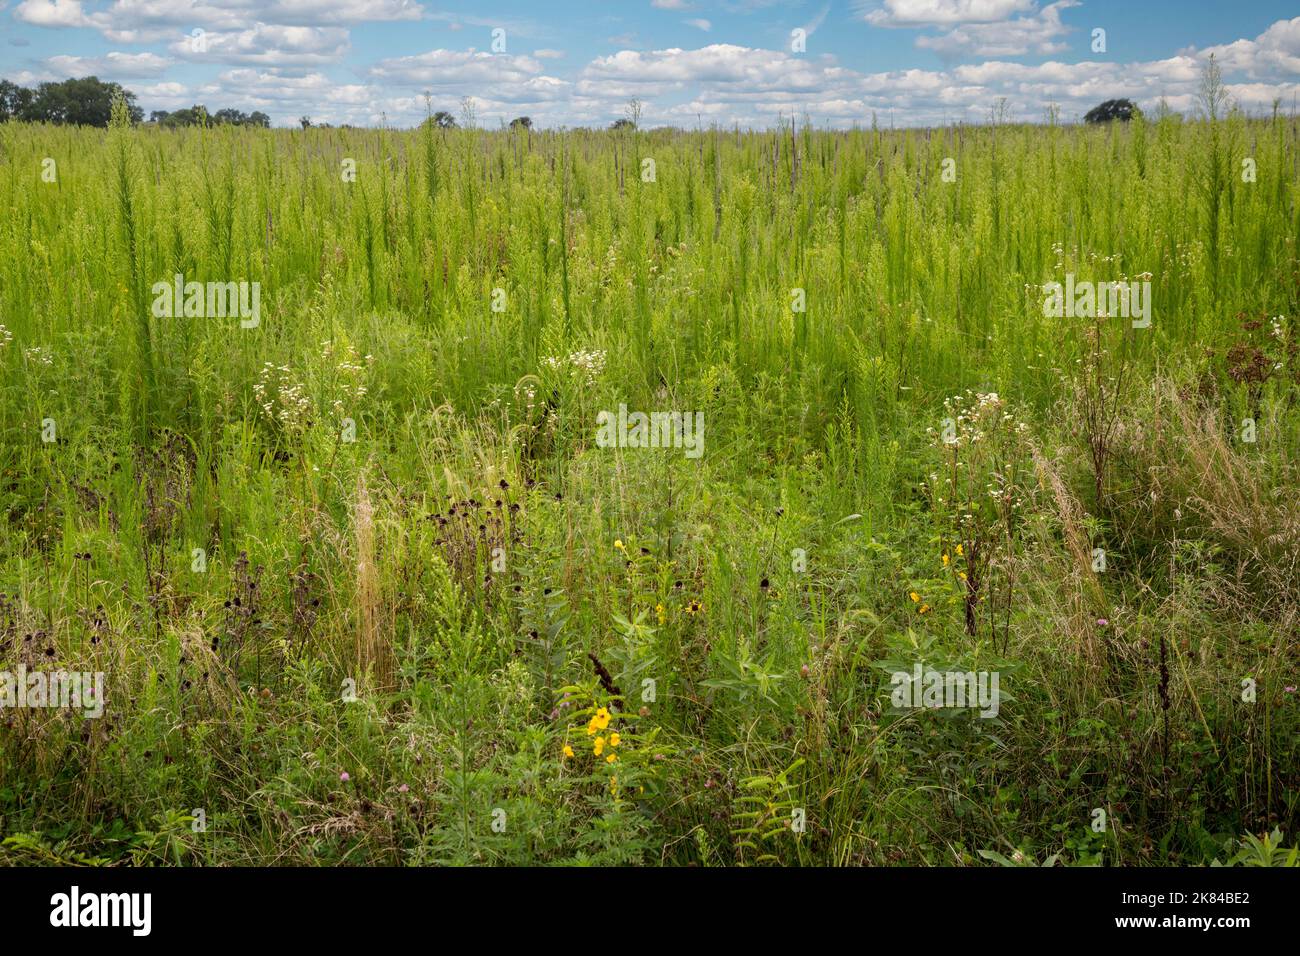 A Conservation Reserve Preserving Indigenous Wild Grasses and Flowers. Manchester, Iowa. Stock Photo